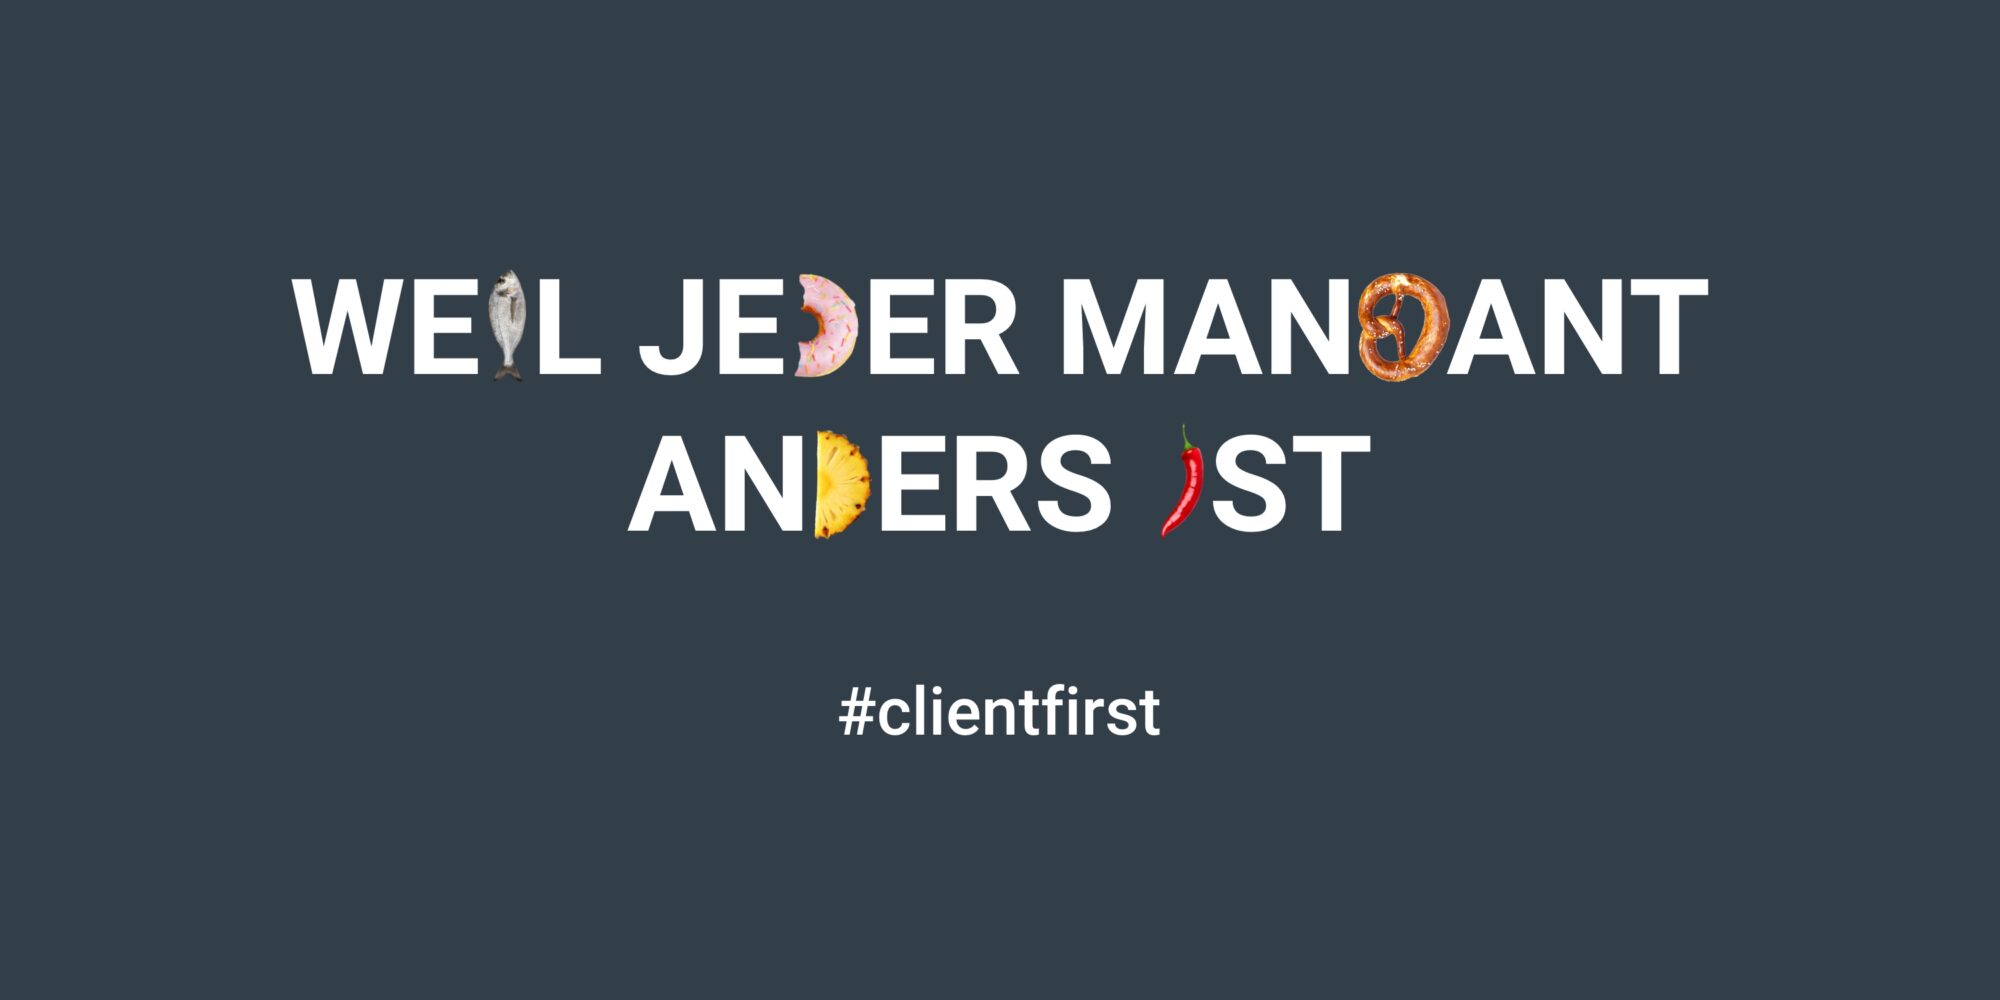 Weil jeder Mandant anders ist – MRH Trowe – Client First